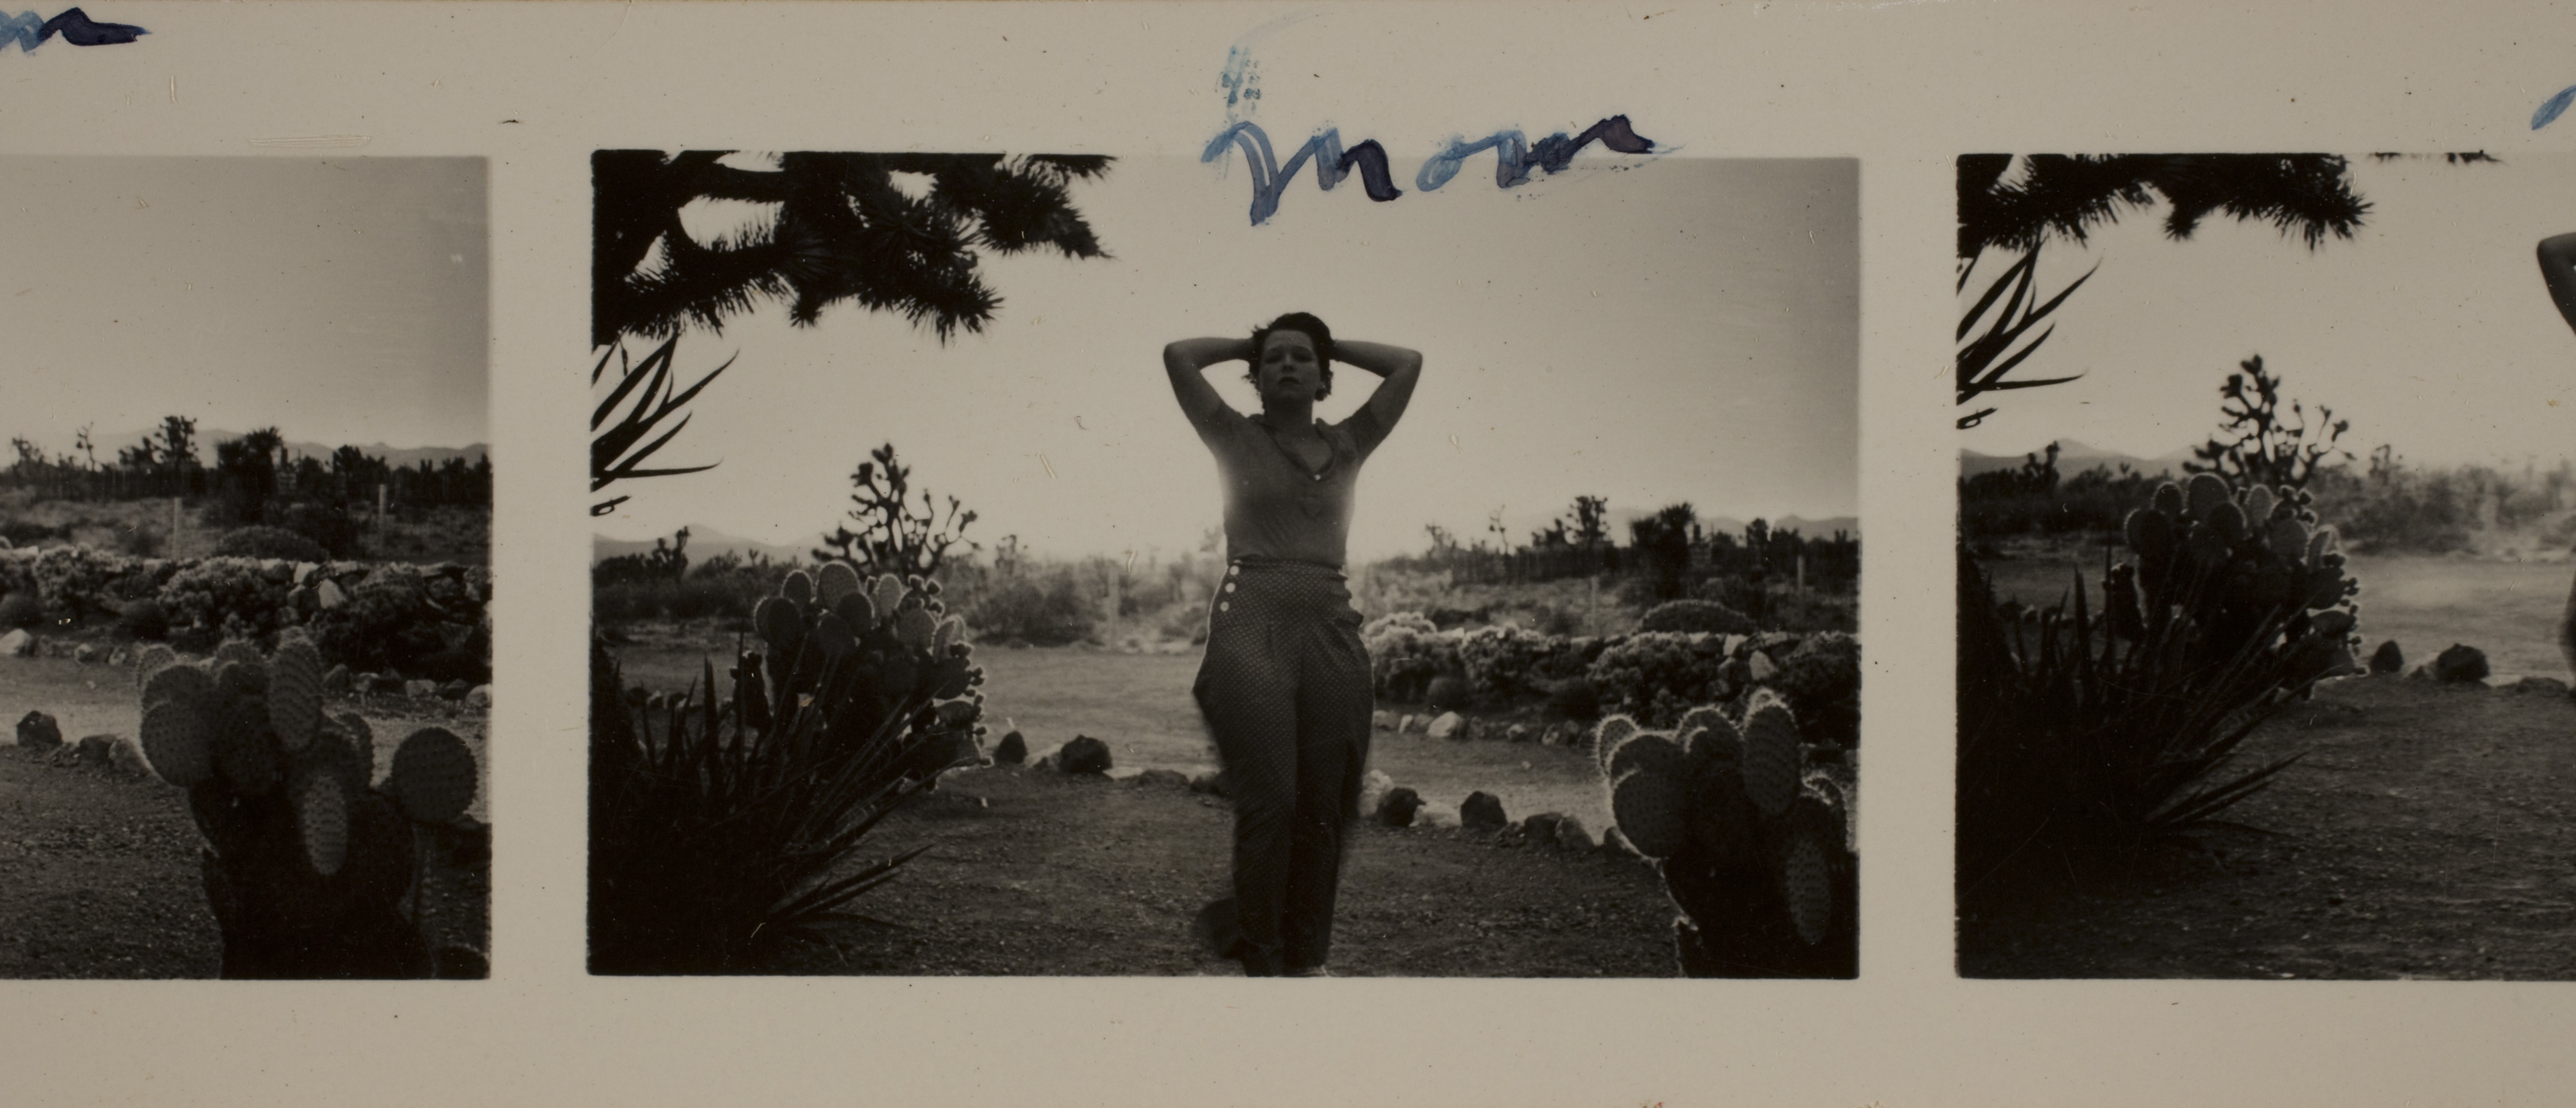 Clara Bow at Walking Box Ranch, Nevada in front of Ranch house." Rock gardens are in the background: photographic print